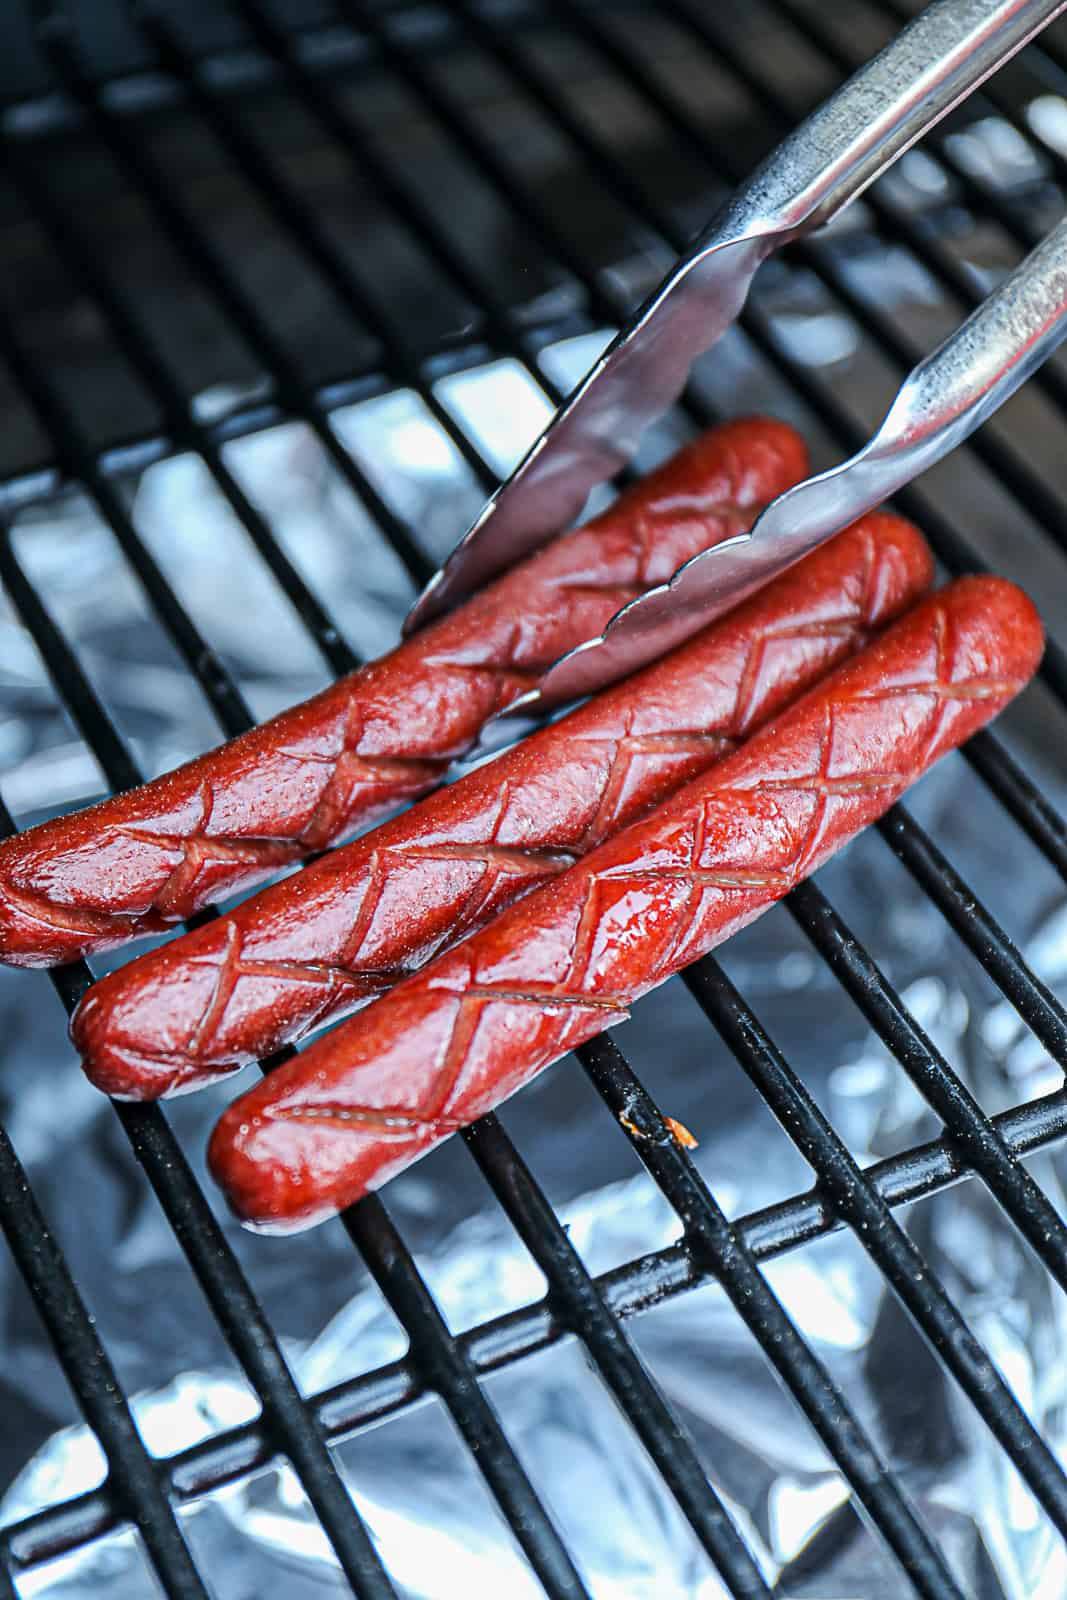 Tongs Holding Scored Smoked Hot Dogs On Traeger Grills 